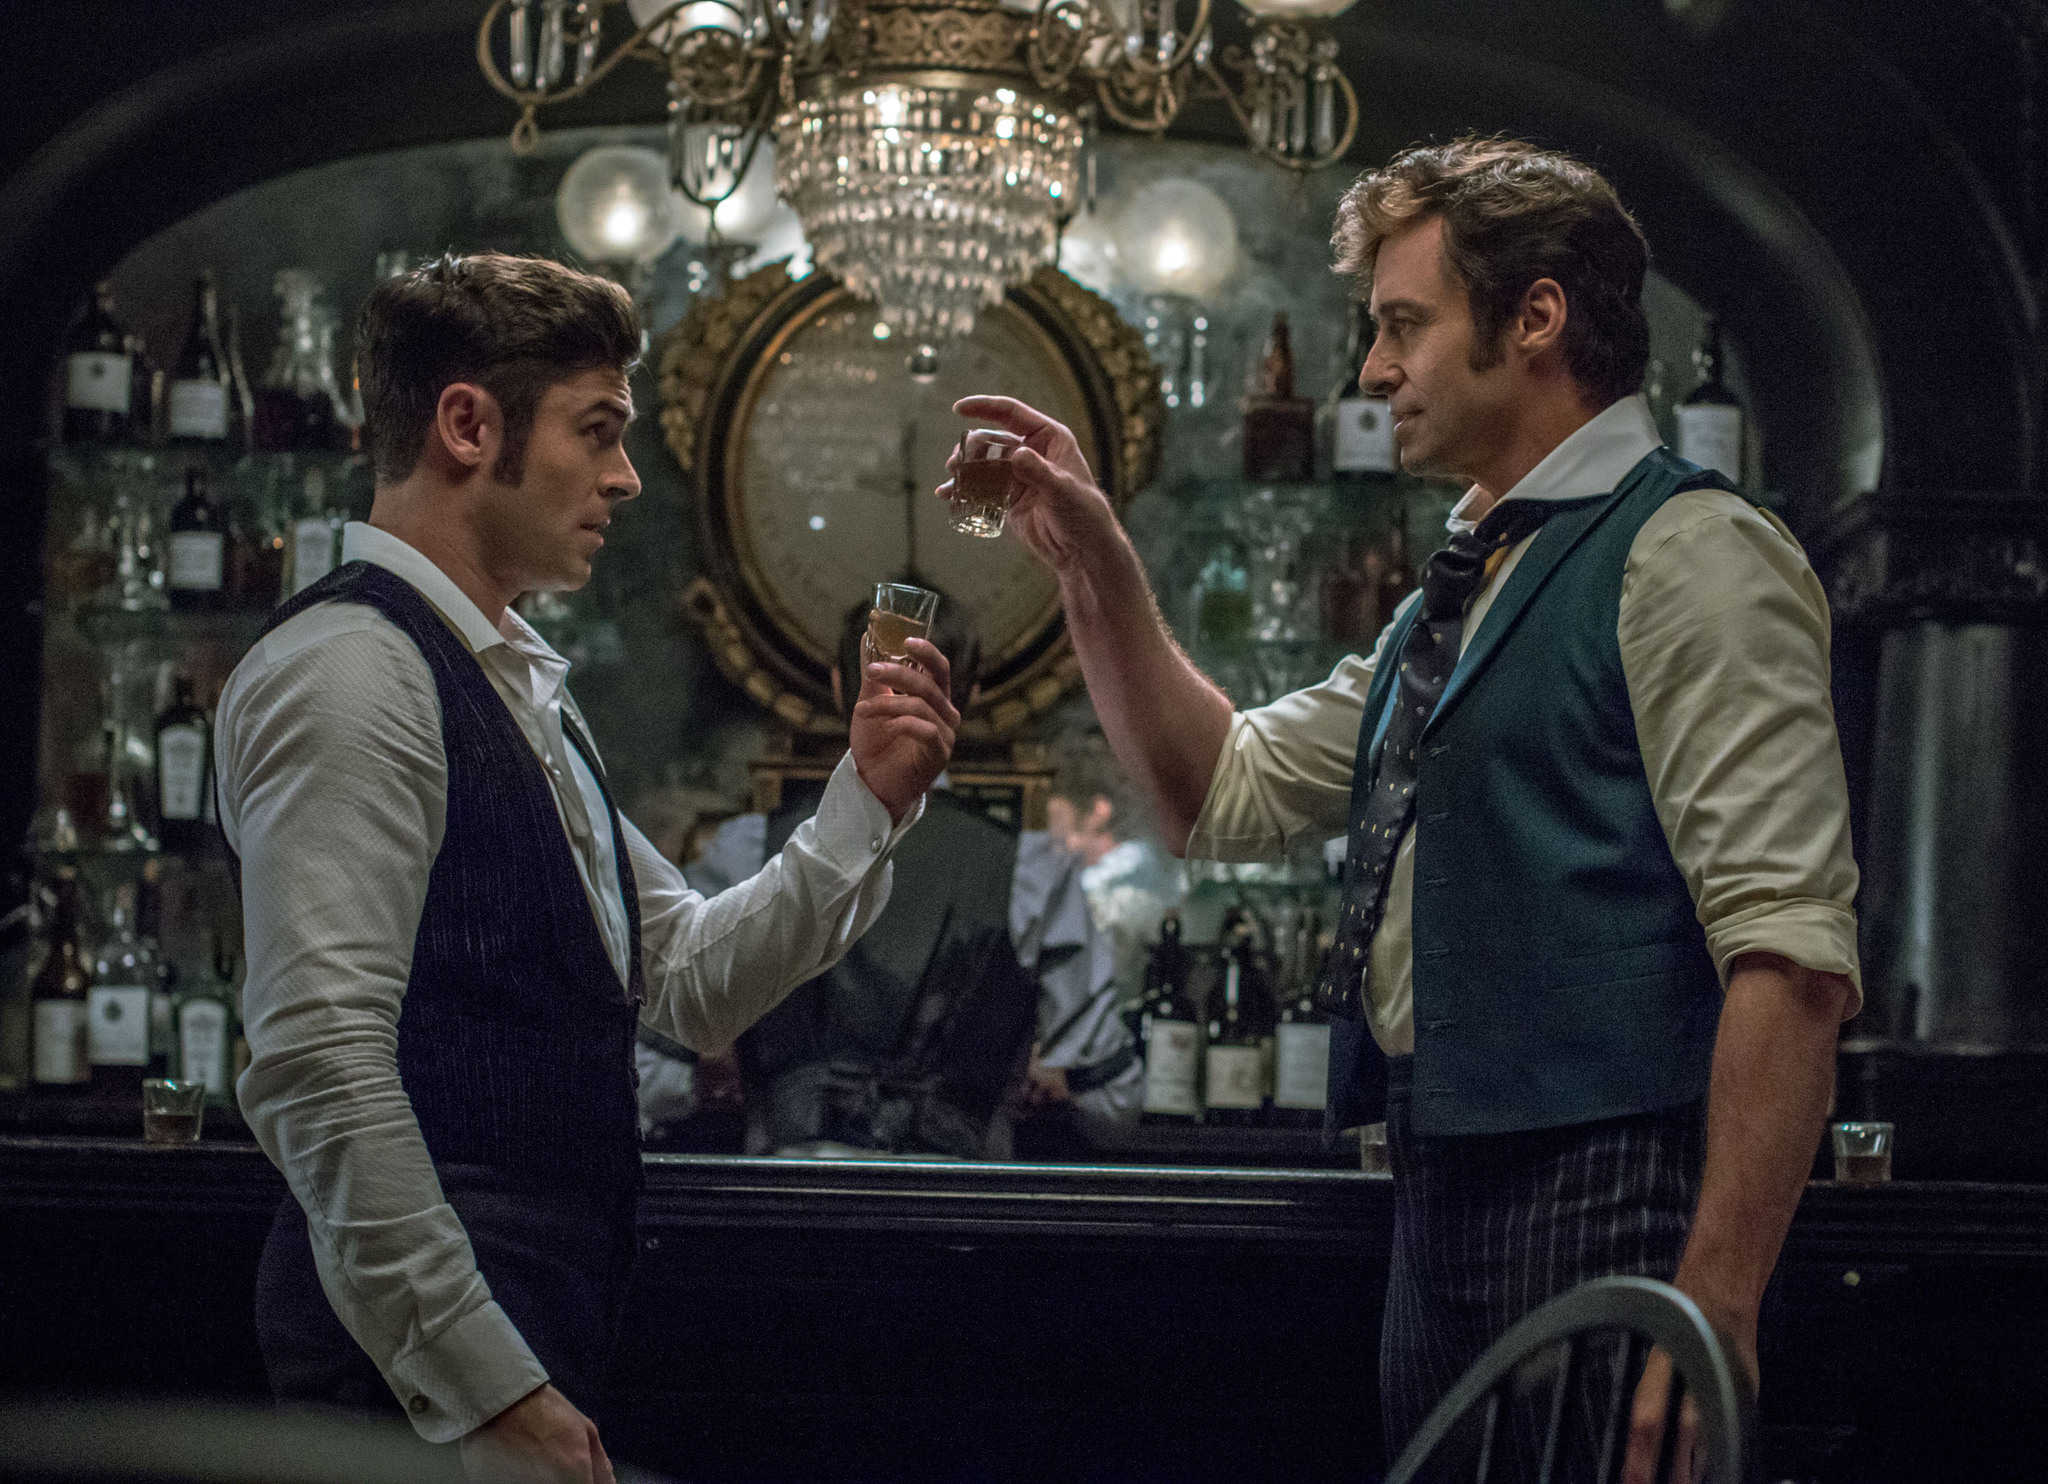 Hugh Jackman and Zac Efron in The Greatest Showman (2017)